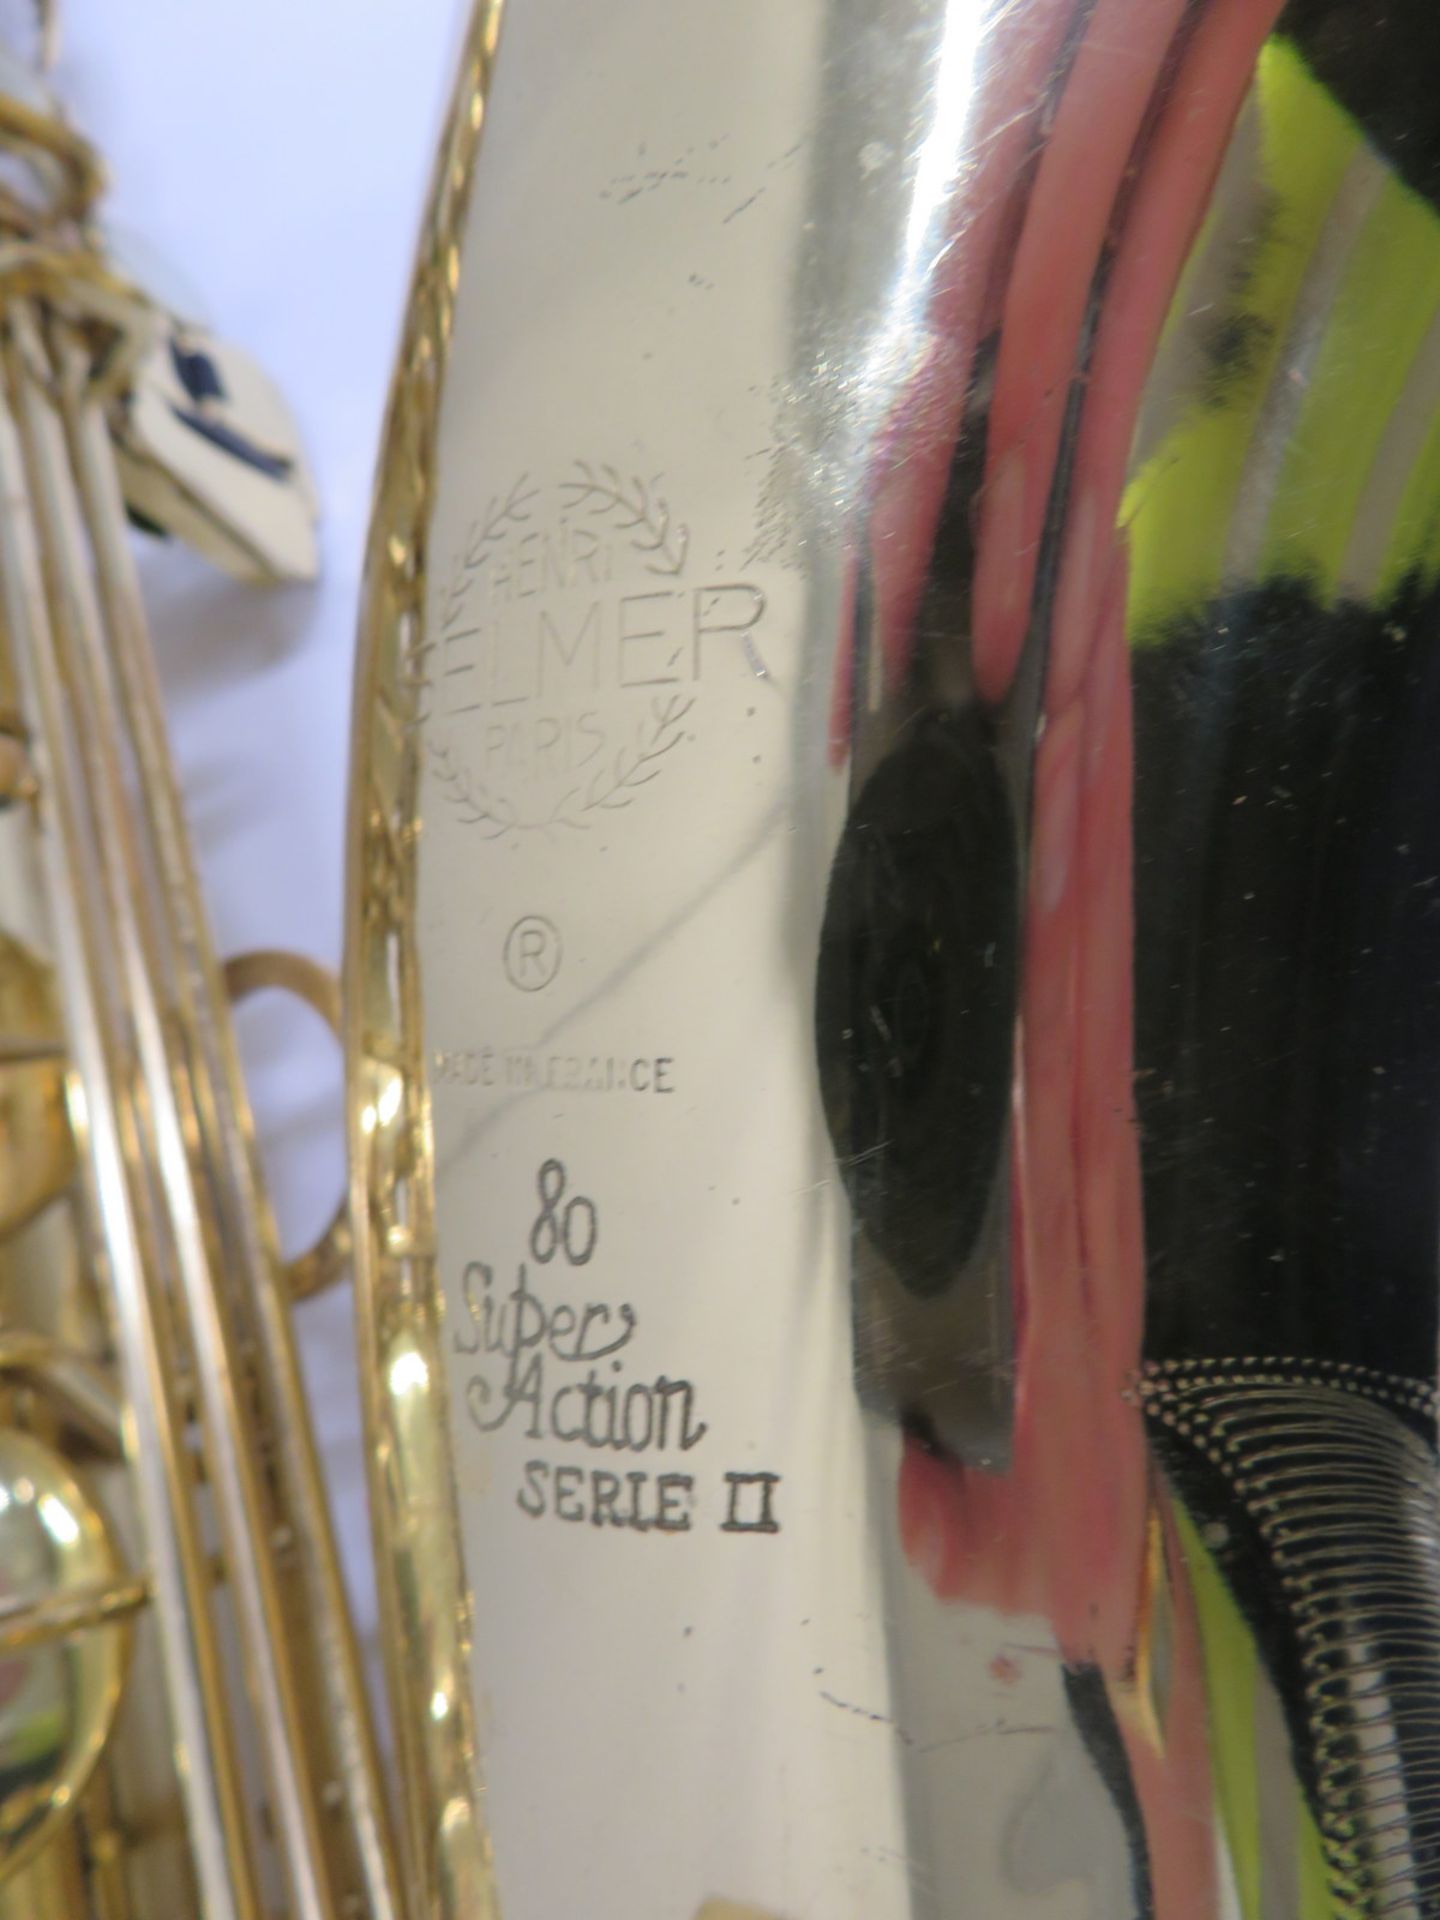 Henri Selmer 80 super action series 2 tenor saxophone with case. Serial number: N.613456. - Image 5 of 17